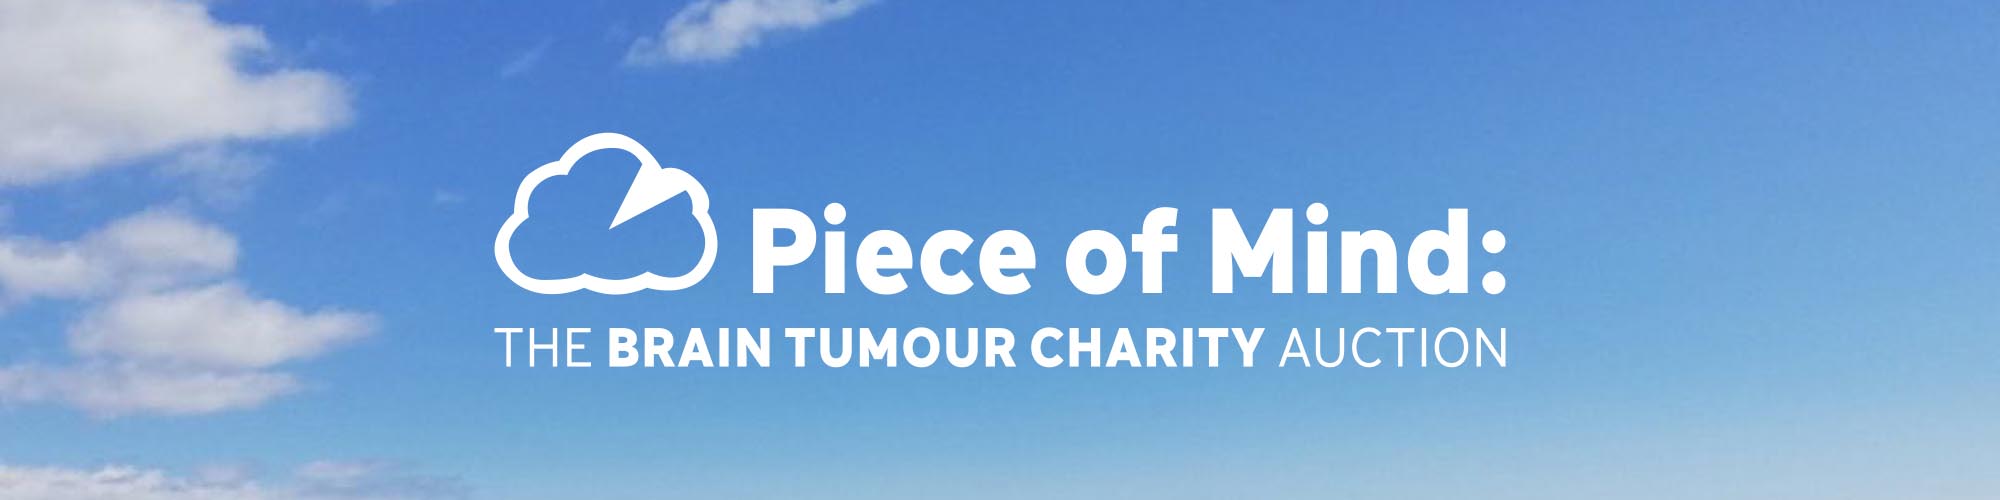 Piece of Mind : The Brain Tumour Charity Auction